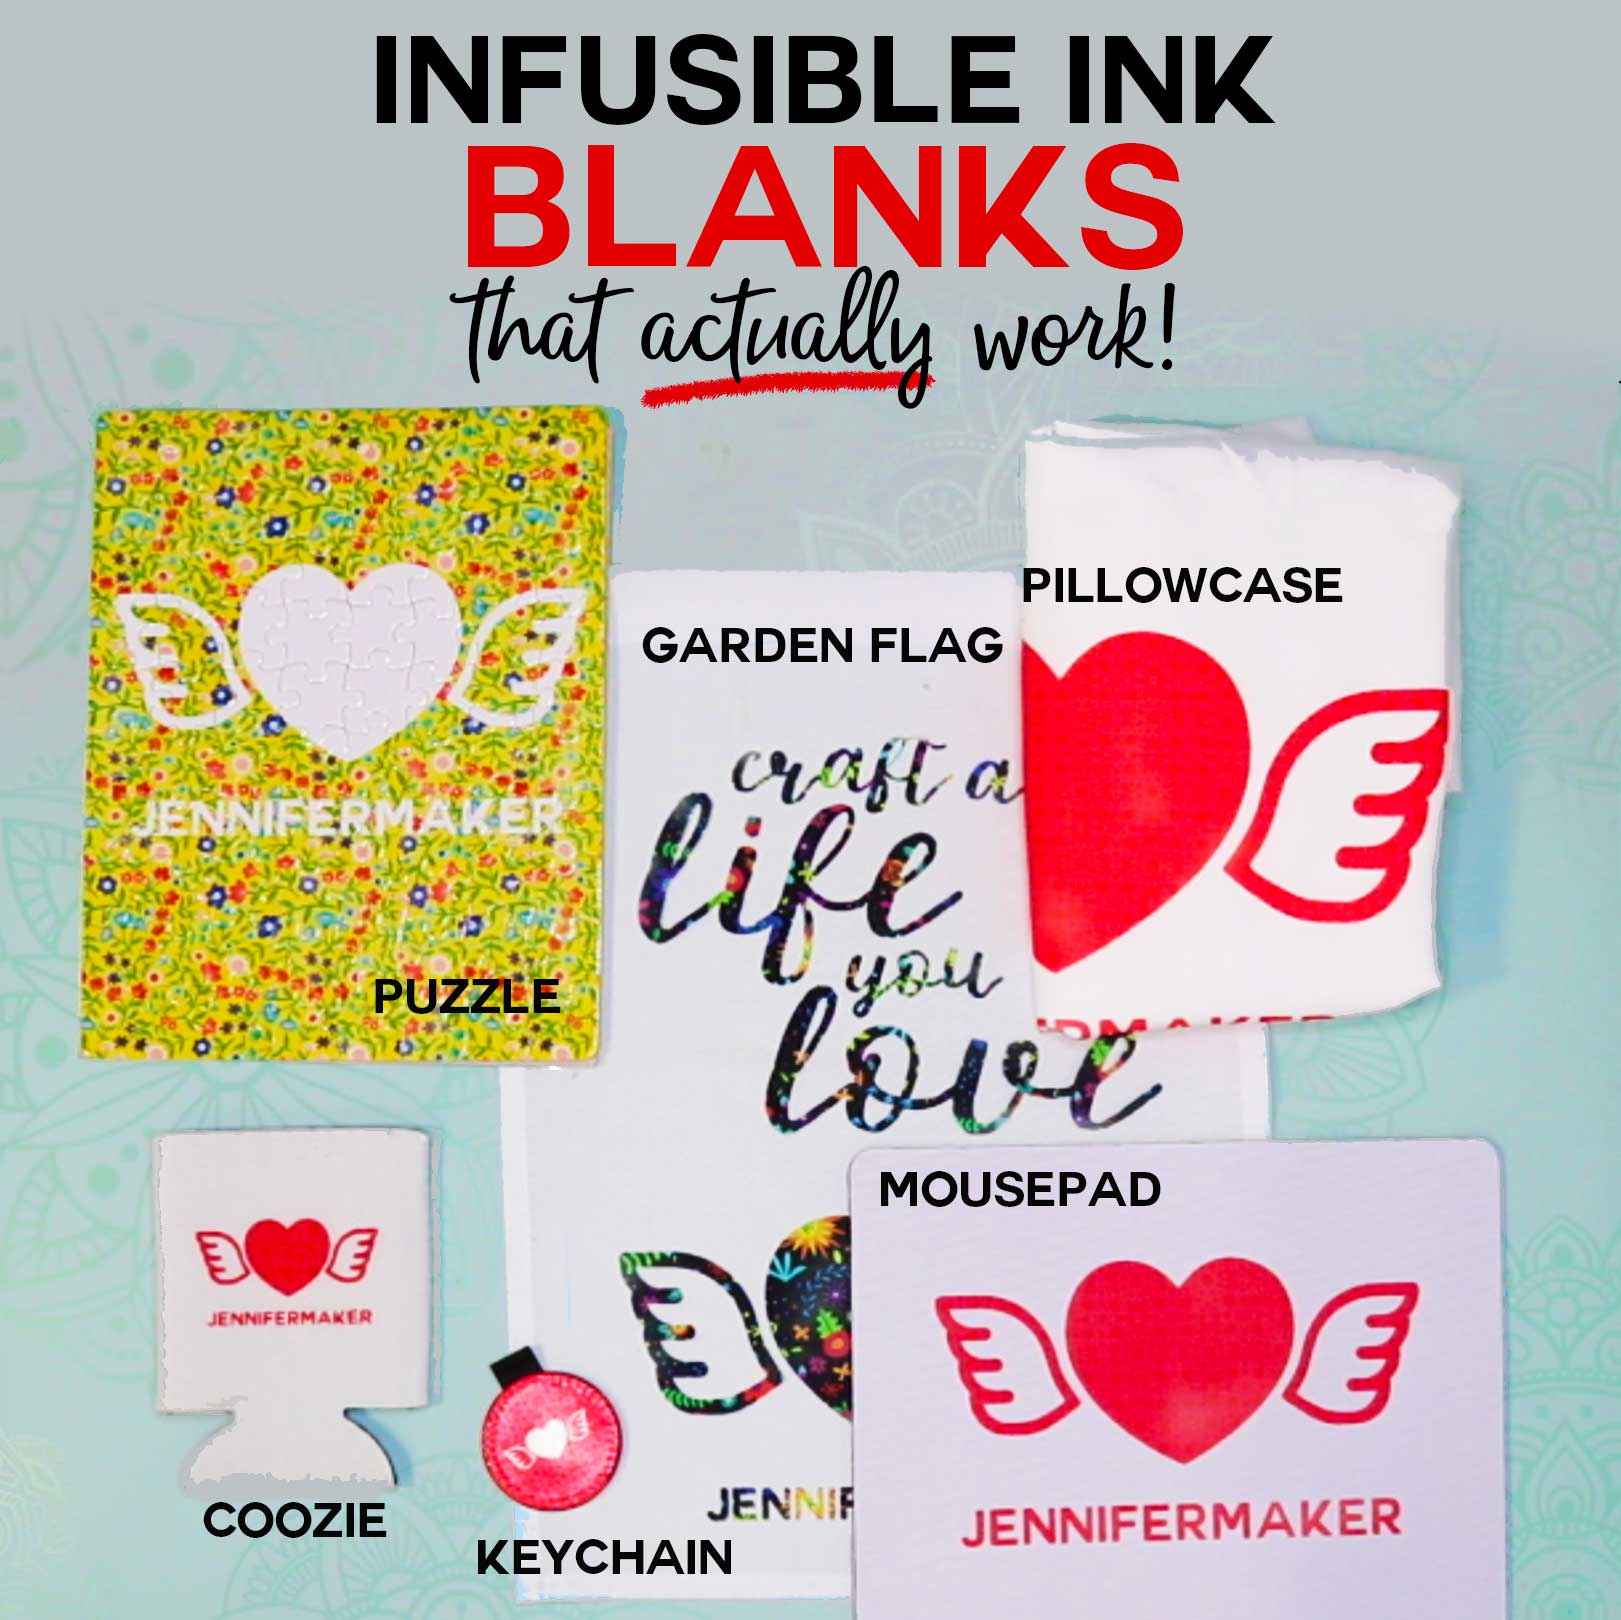 Cricut Infusible Ink Blanks: Fun Things to Make